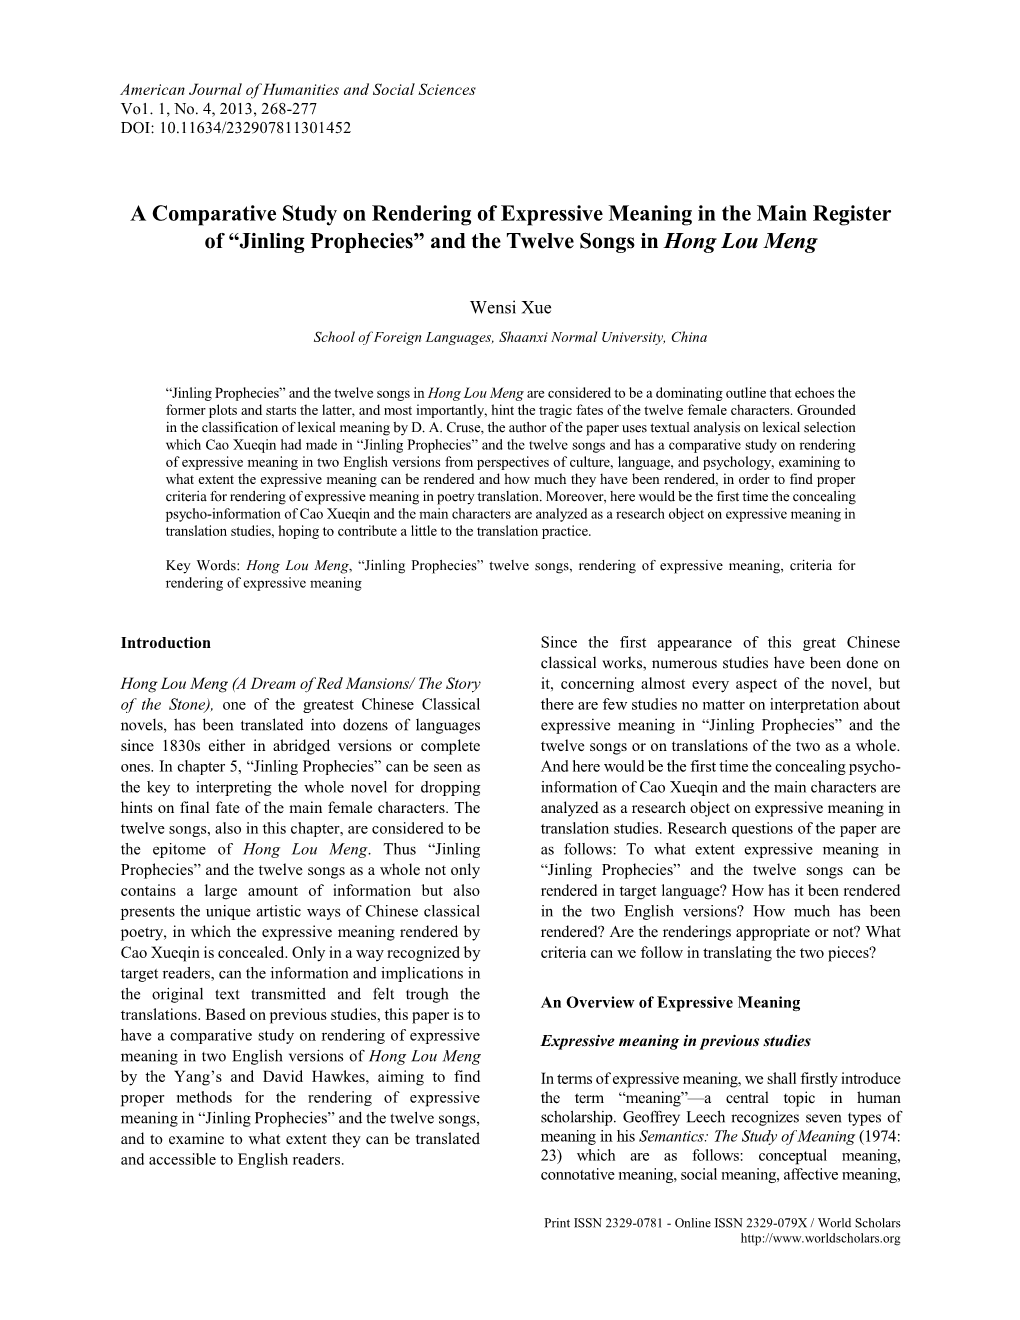 A Comparative Study on Rendering of Expressive Meaning in the Main Register of “Jinling Prophecies” and the Twelve Songs in Hong Lou Meng